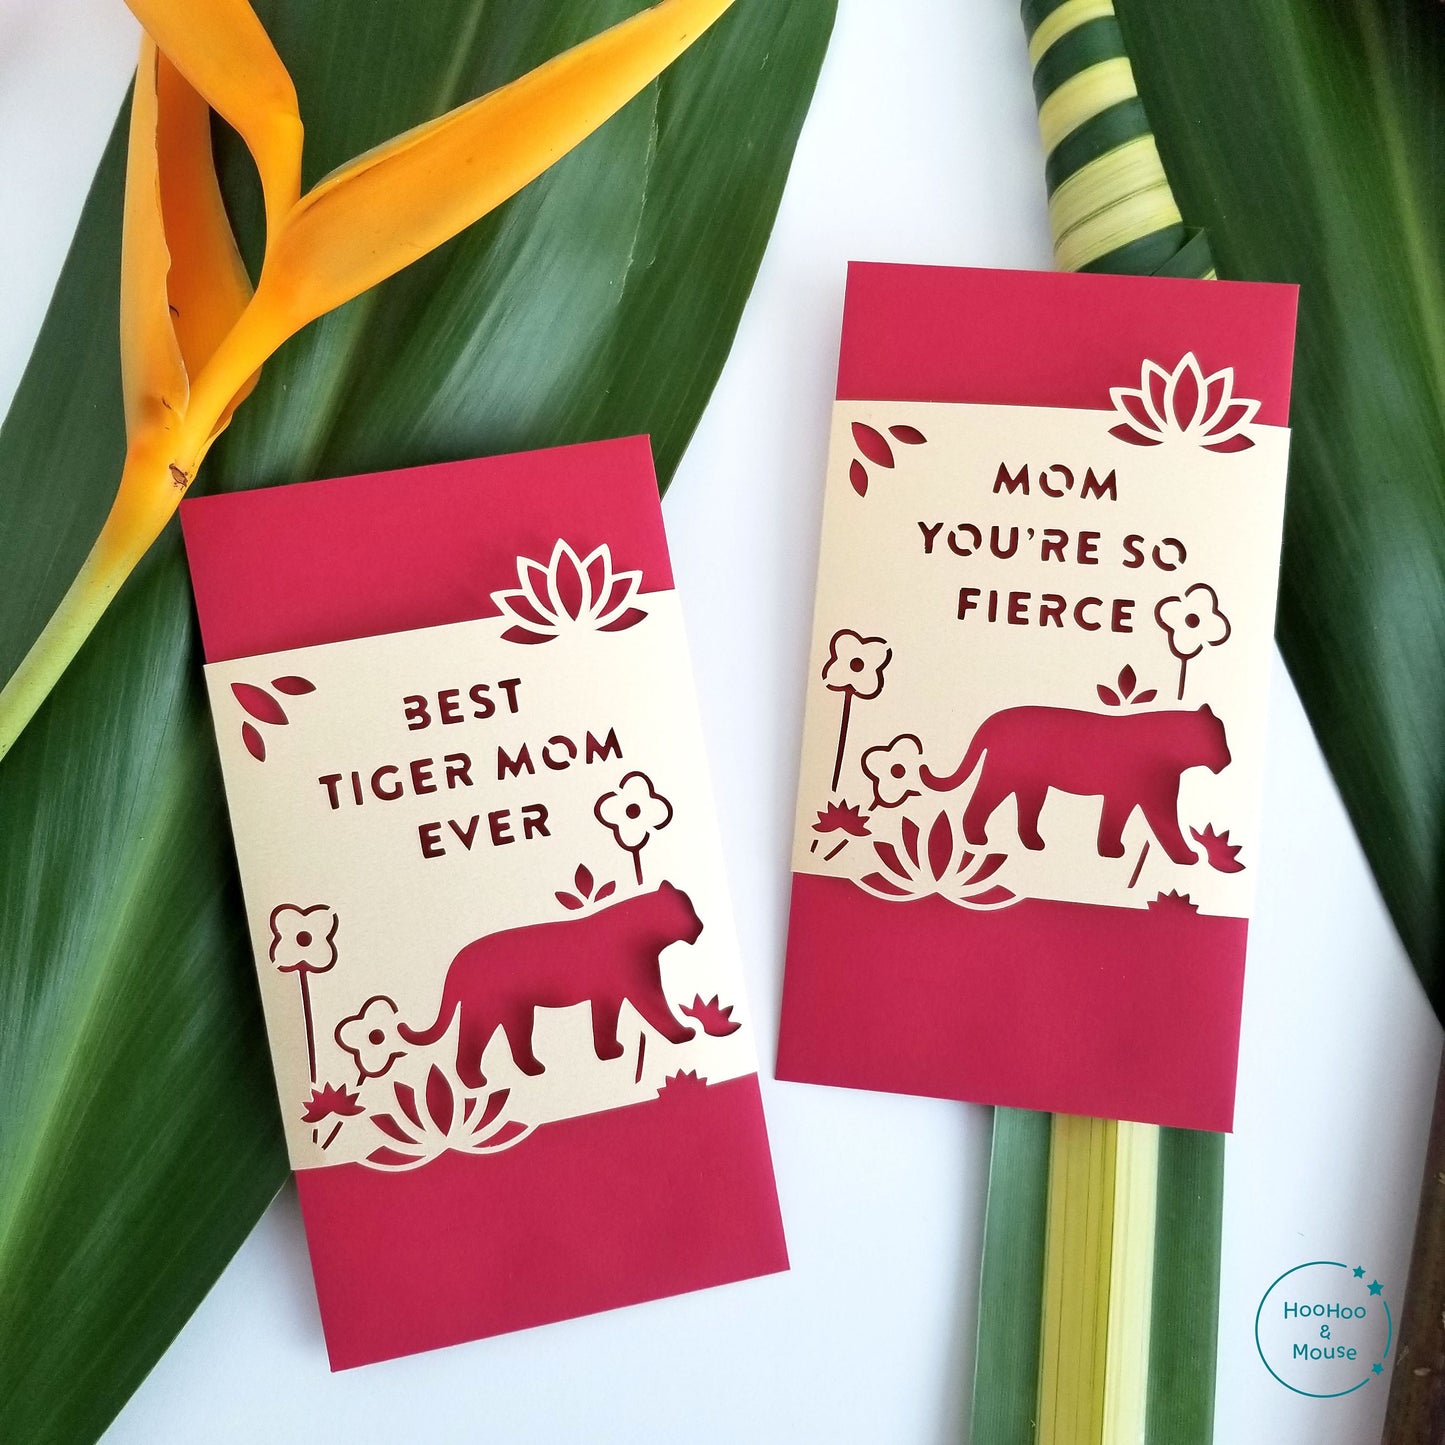 So Fierce Tiger Red Envelope, personalized